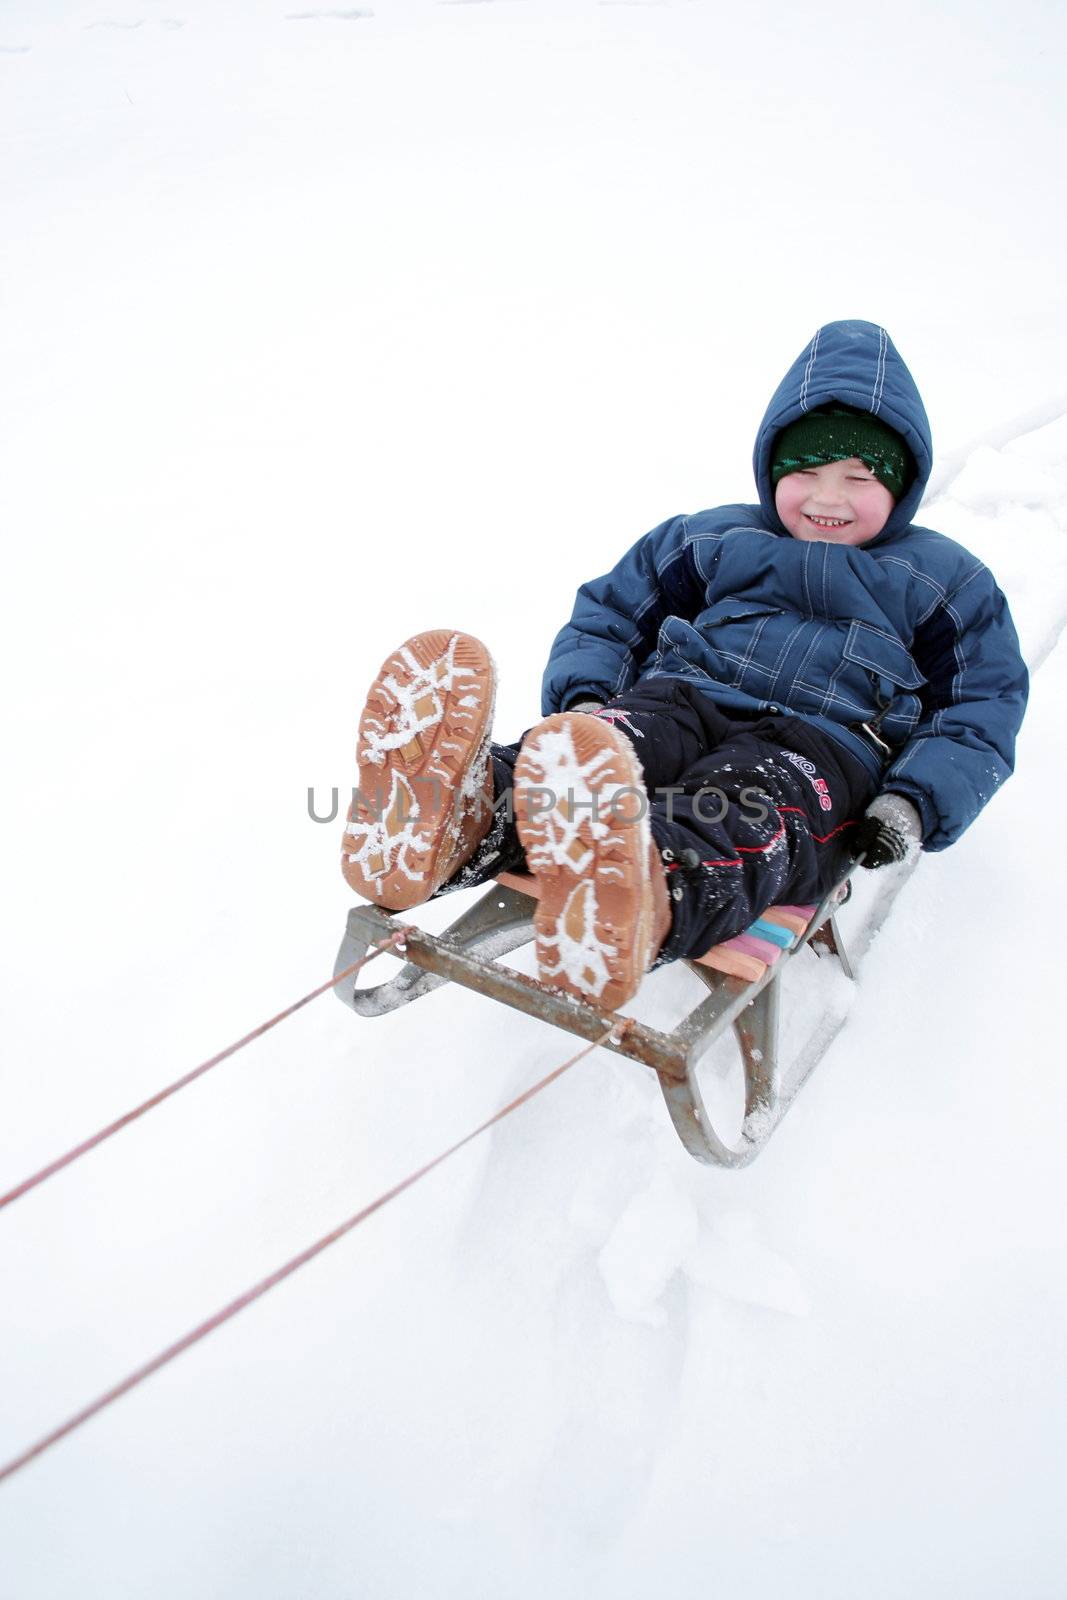 Winter riding of the boy on sled